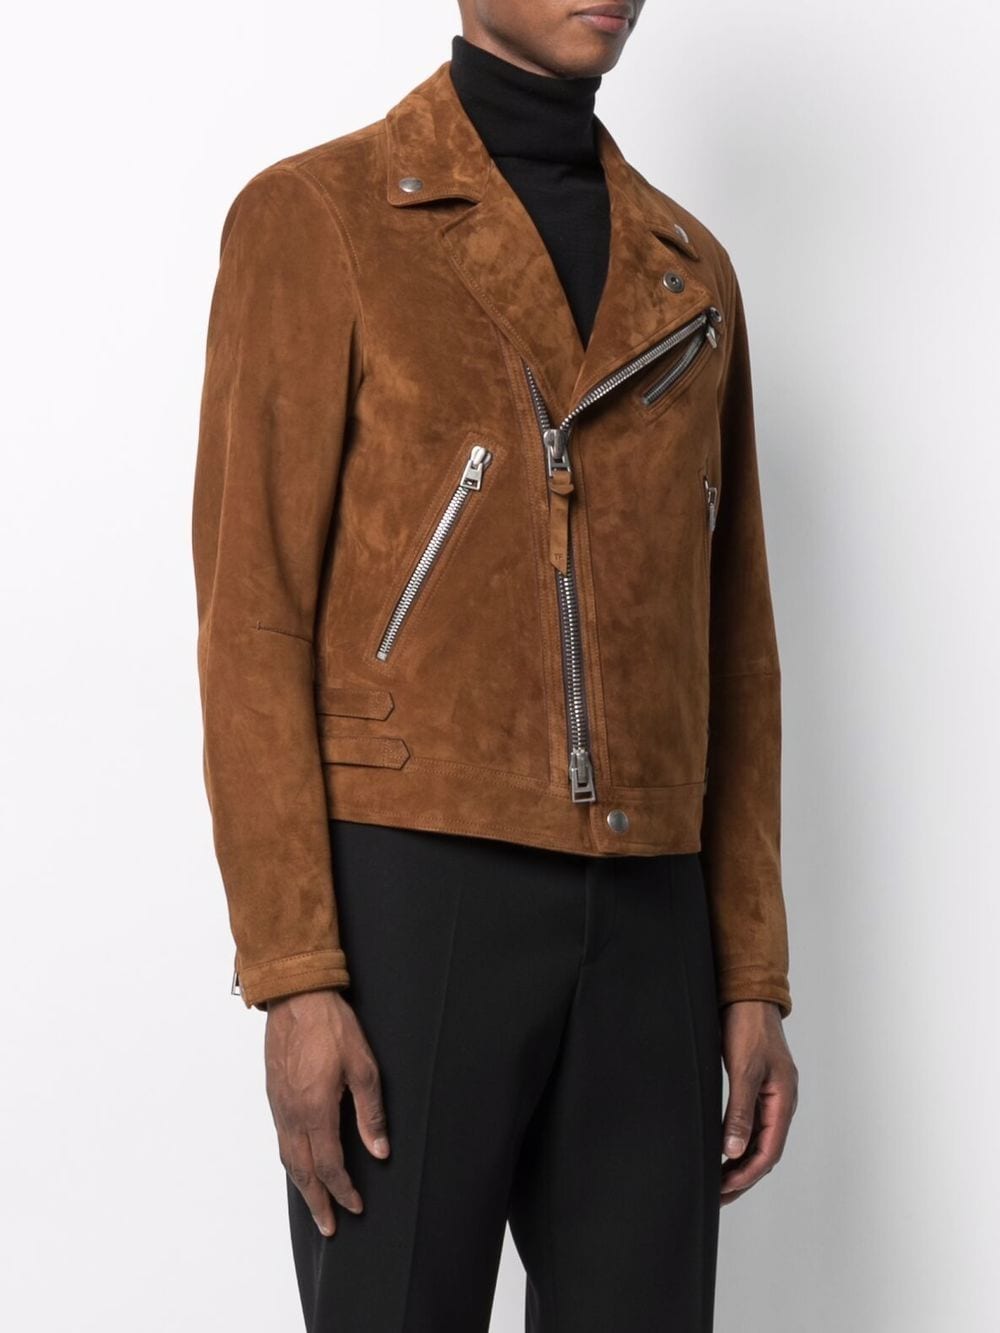 TOM FORD double-breasted Biker Jacket - Farfetch